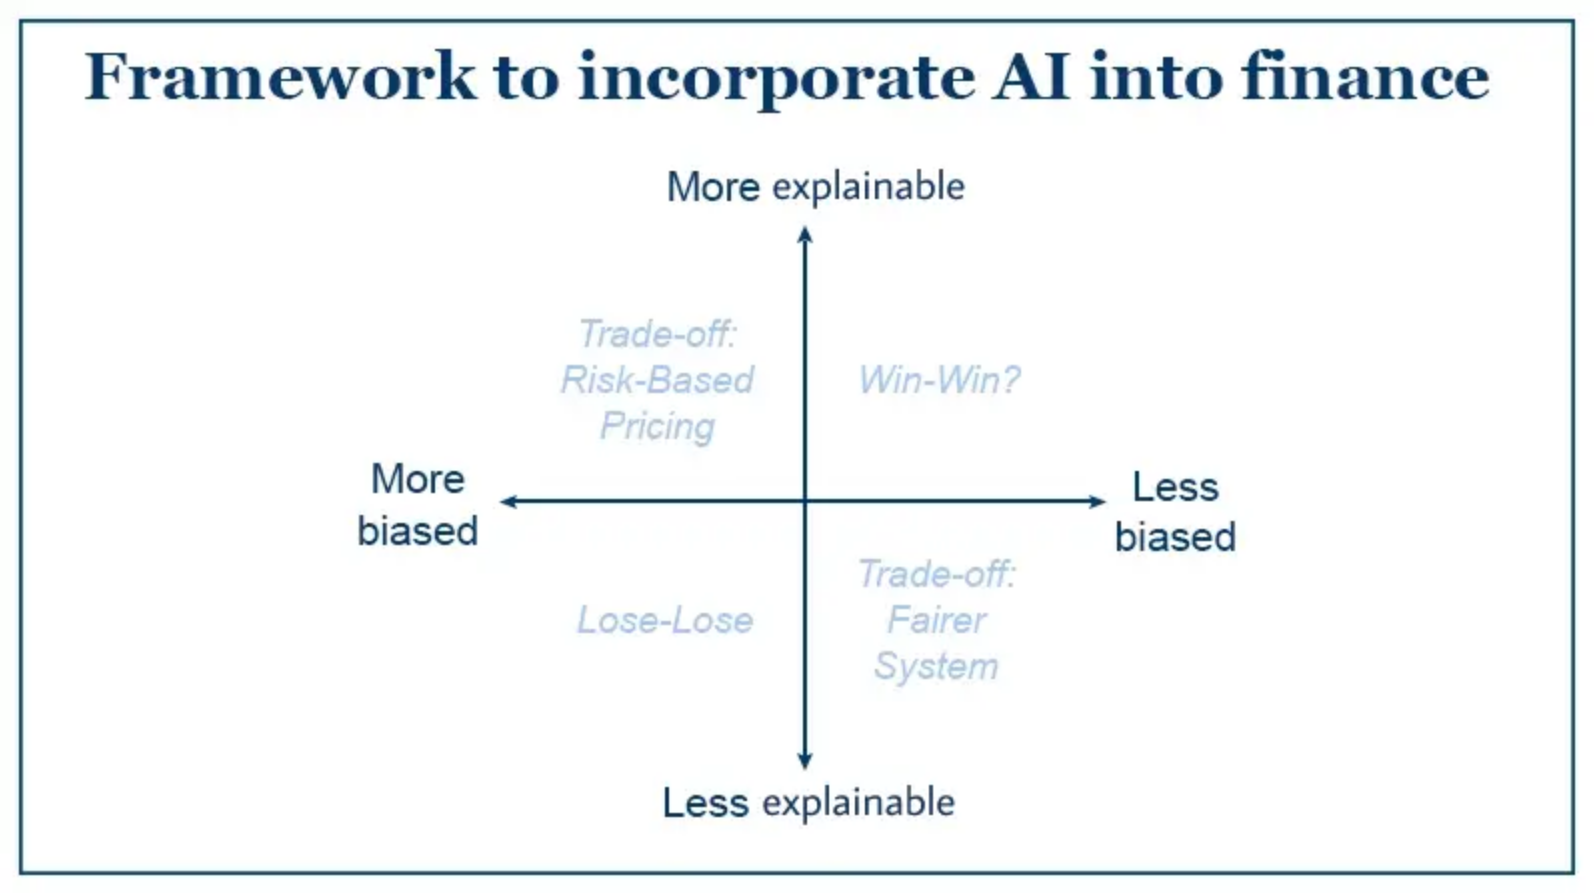 Graphic of framework to incorporate AI into finance